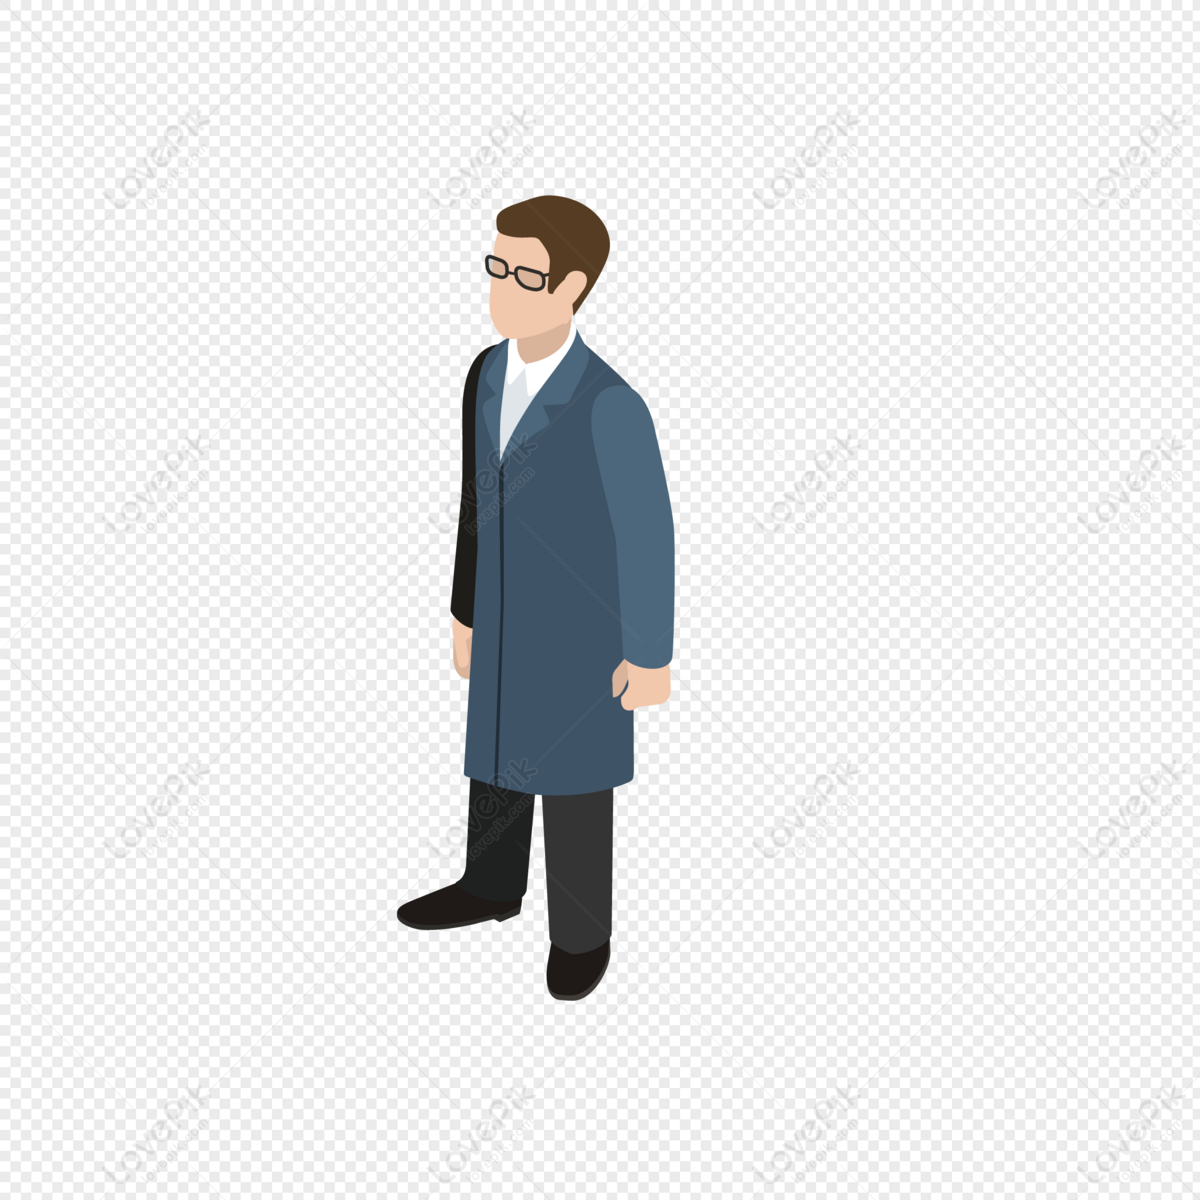 Man PNG Image Free Download And Clipart Image For Free Download ...